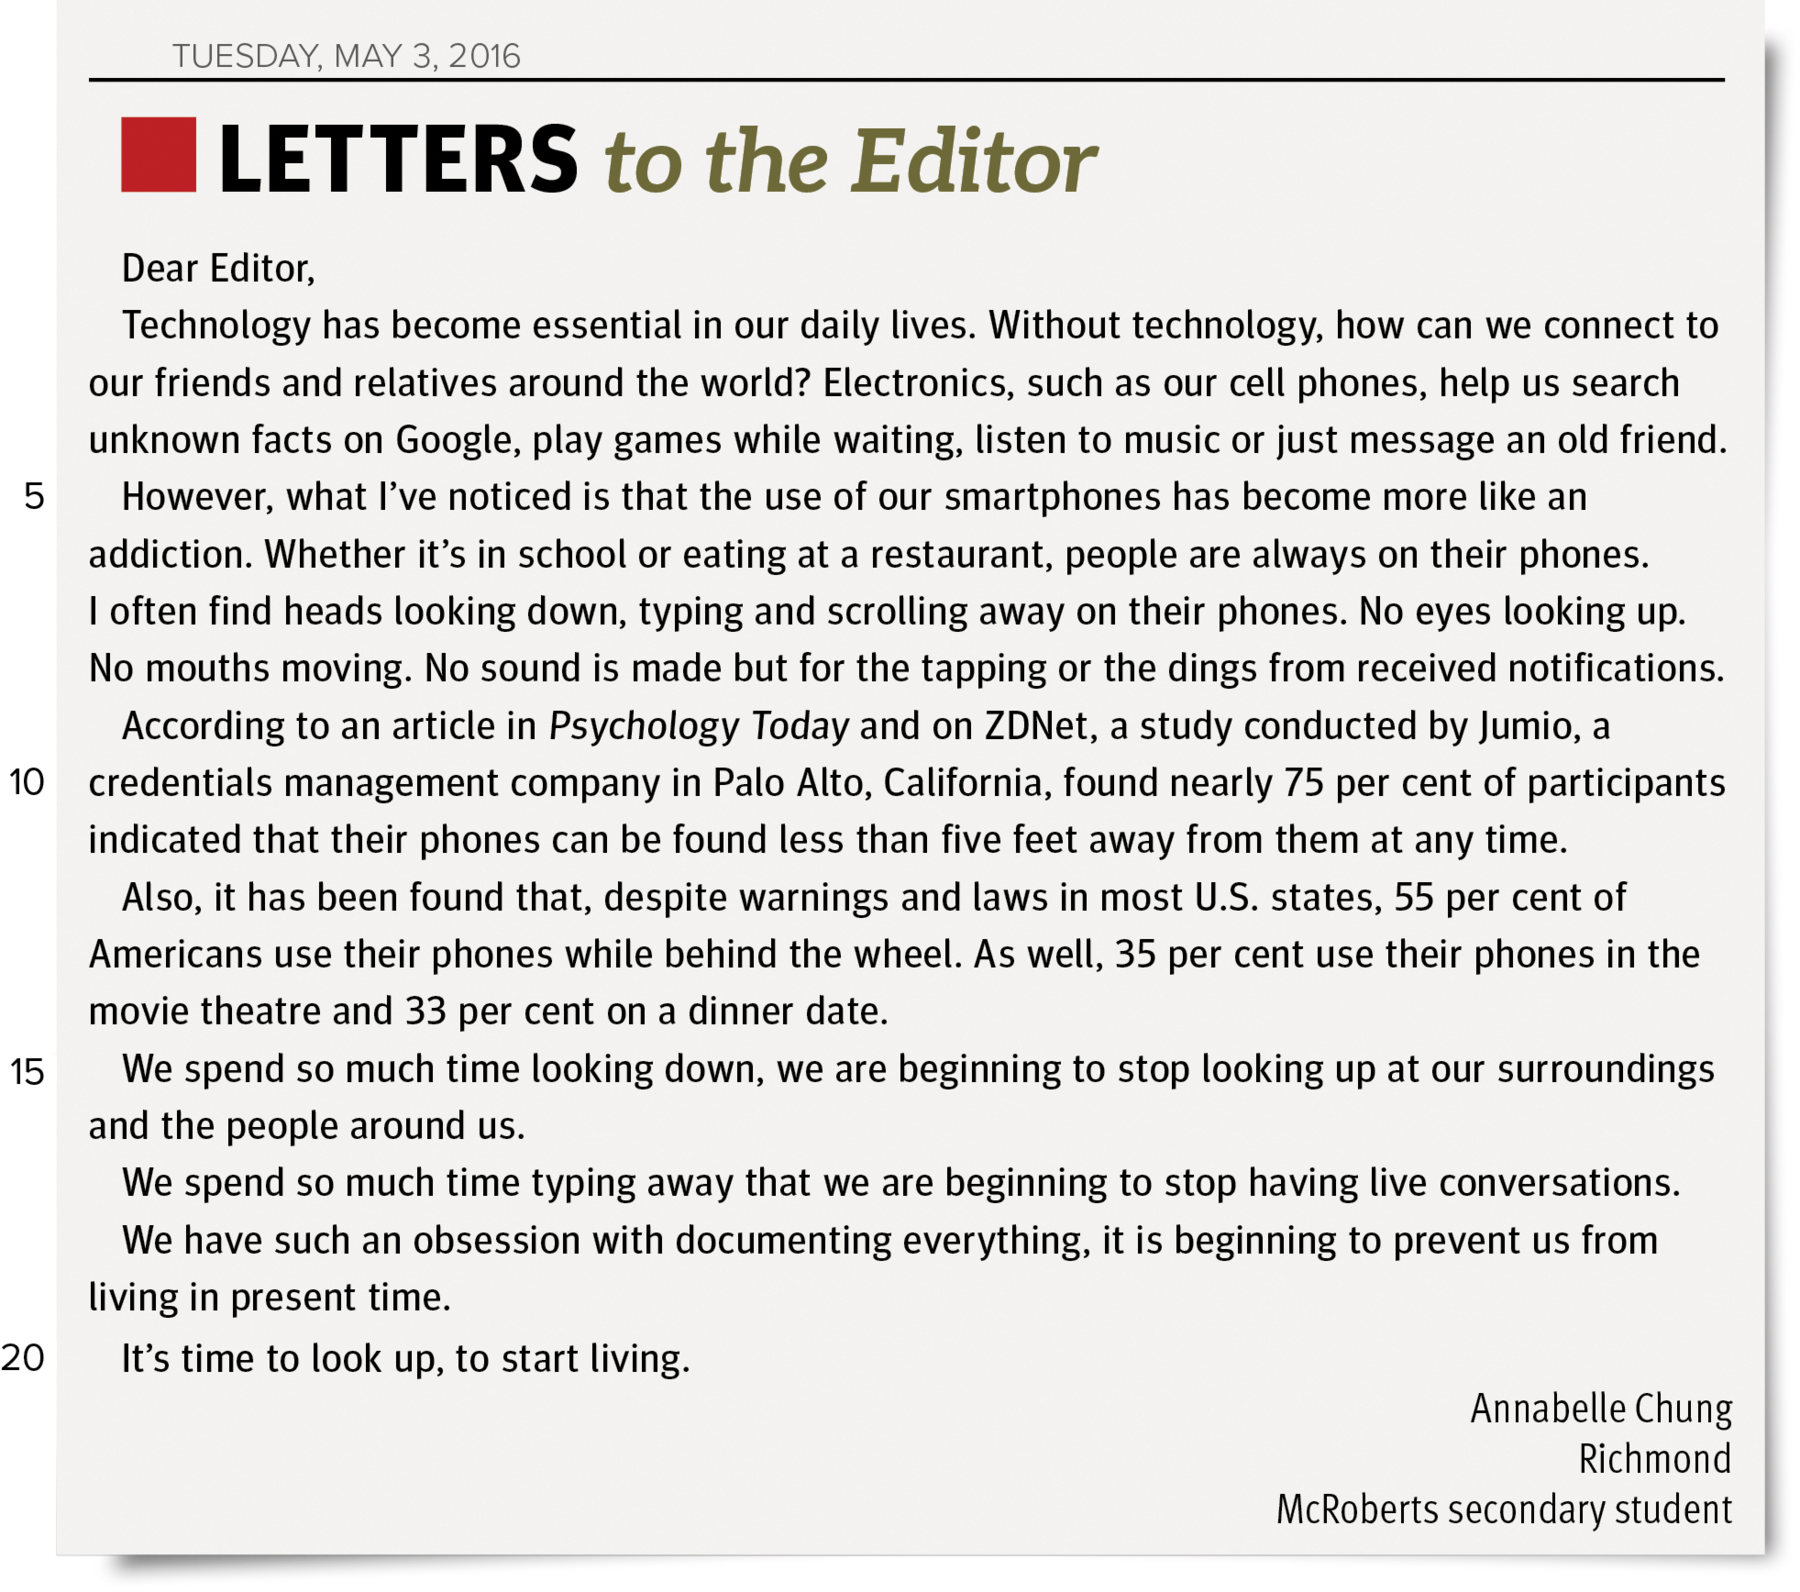 Carta ao editor. header: TUESDAY, MAY 3, 2016. Title: LETTERS to the Editor. Text: Dear Editor, Technology has become essential in o ur daily lives. Without technology, how can we connect to our friends and relatives around the world? Electronics, such as o ur cell phones, help us search unknown facts on Google, play games while waiting, listen to music or just messag e an old friend. (line five) However, what I’ve noticed is that the use of our smartphones has become more like an addiction. Whether it’s in school o reating at a restaurant, people are always on their phones. I often find heads looking down, typing and scrolling away on their phones. No eyes looking up. No mouths moving. No sound is made but for thet apping or the dings from received notifications. According to an article in Psychology Today and on ZDNet, a study conducted by Jumio, a (line ten) credentials management company in Palo Alto, California, found nearly seventy-five per cent of par ticipants indicated that their phones can be found less than five feet away from them at any time. Also, it has been found that, despite warnings and laws in most U.S. states, fifty-five per cent of Americans use their phones while behind the wheel. As well, thirty-five per cent use their phones in the movie theatre and thirty-three percenton a dinner date. (line fifteen) We spend so much time looking down, we are beginning to stop looking up at our surroundings and the people around us. We spend so much time typing a way that we are beginning to stop having live conversations. We have such an obsession with documenting e verything, it is beginning to prevent us from living in present time. (line twenty) It’s time to look up, to start living. Sender: Annabelle Chung Richmond McRoberts secondary student